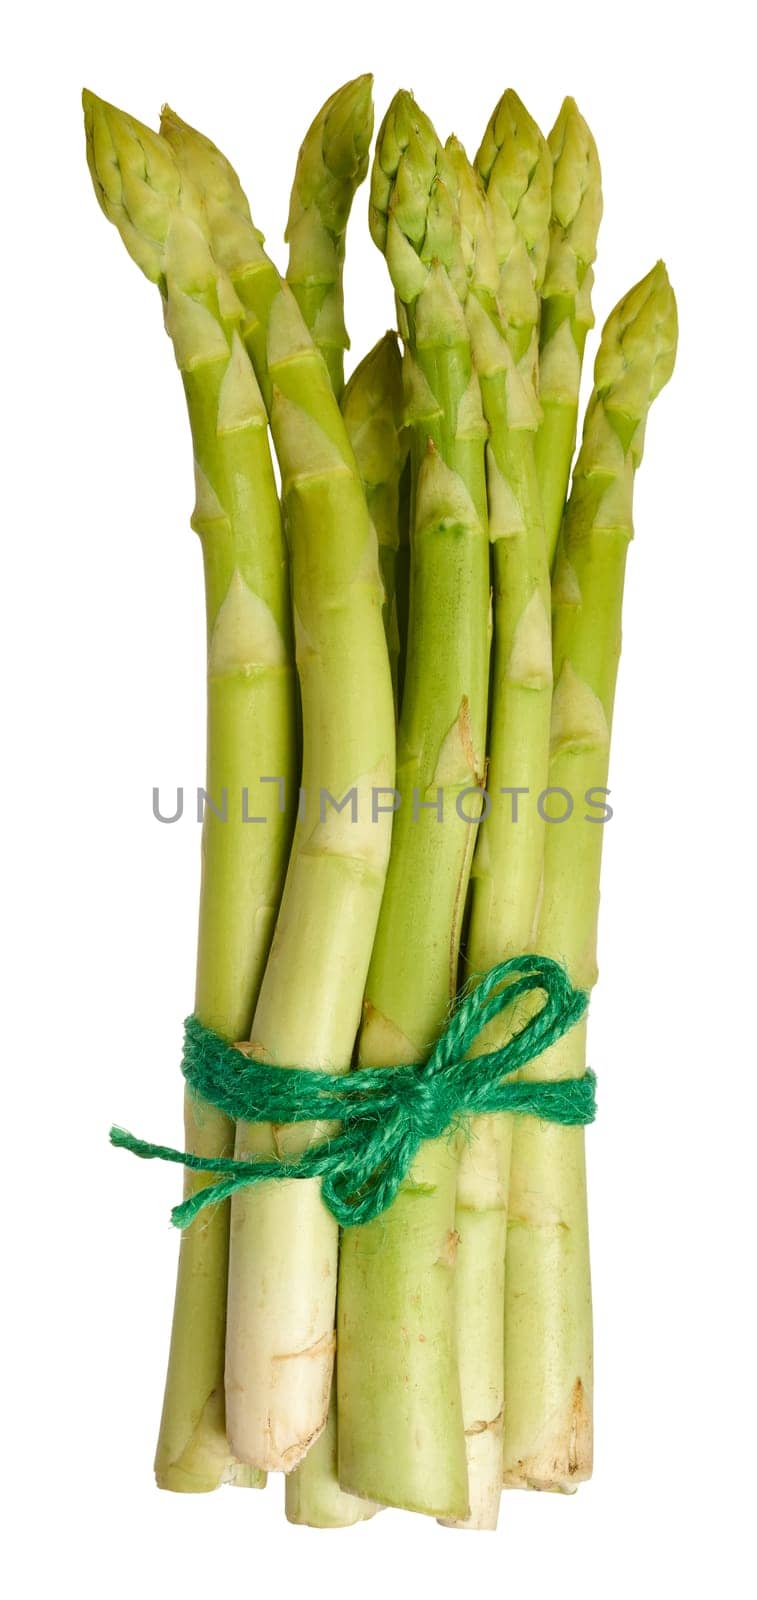 Bunch of fresh tied asparagus on isolated background, tasty and healthy food